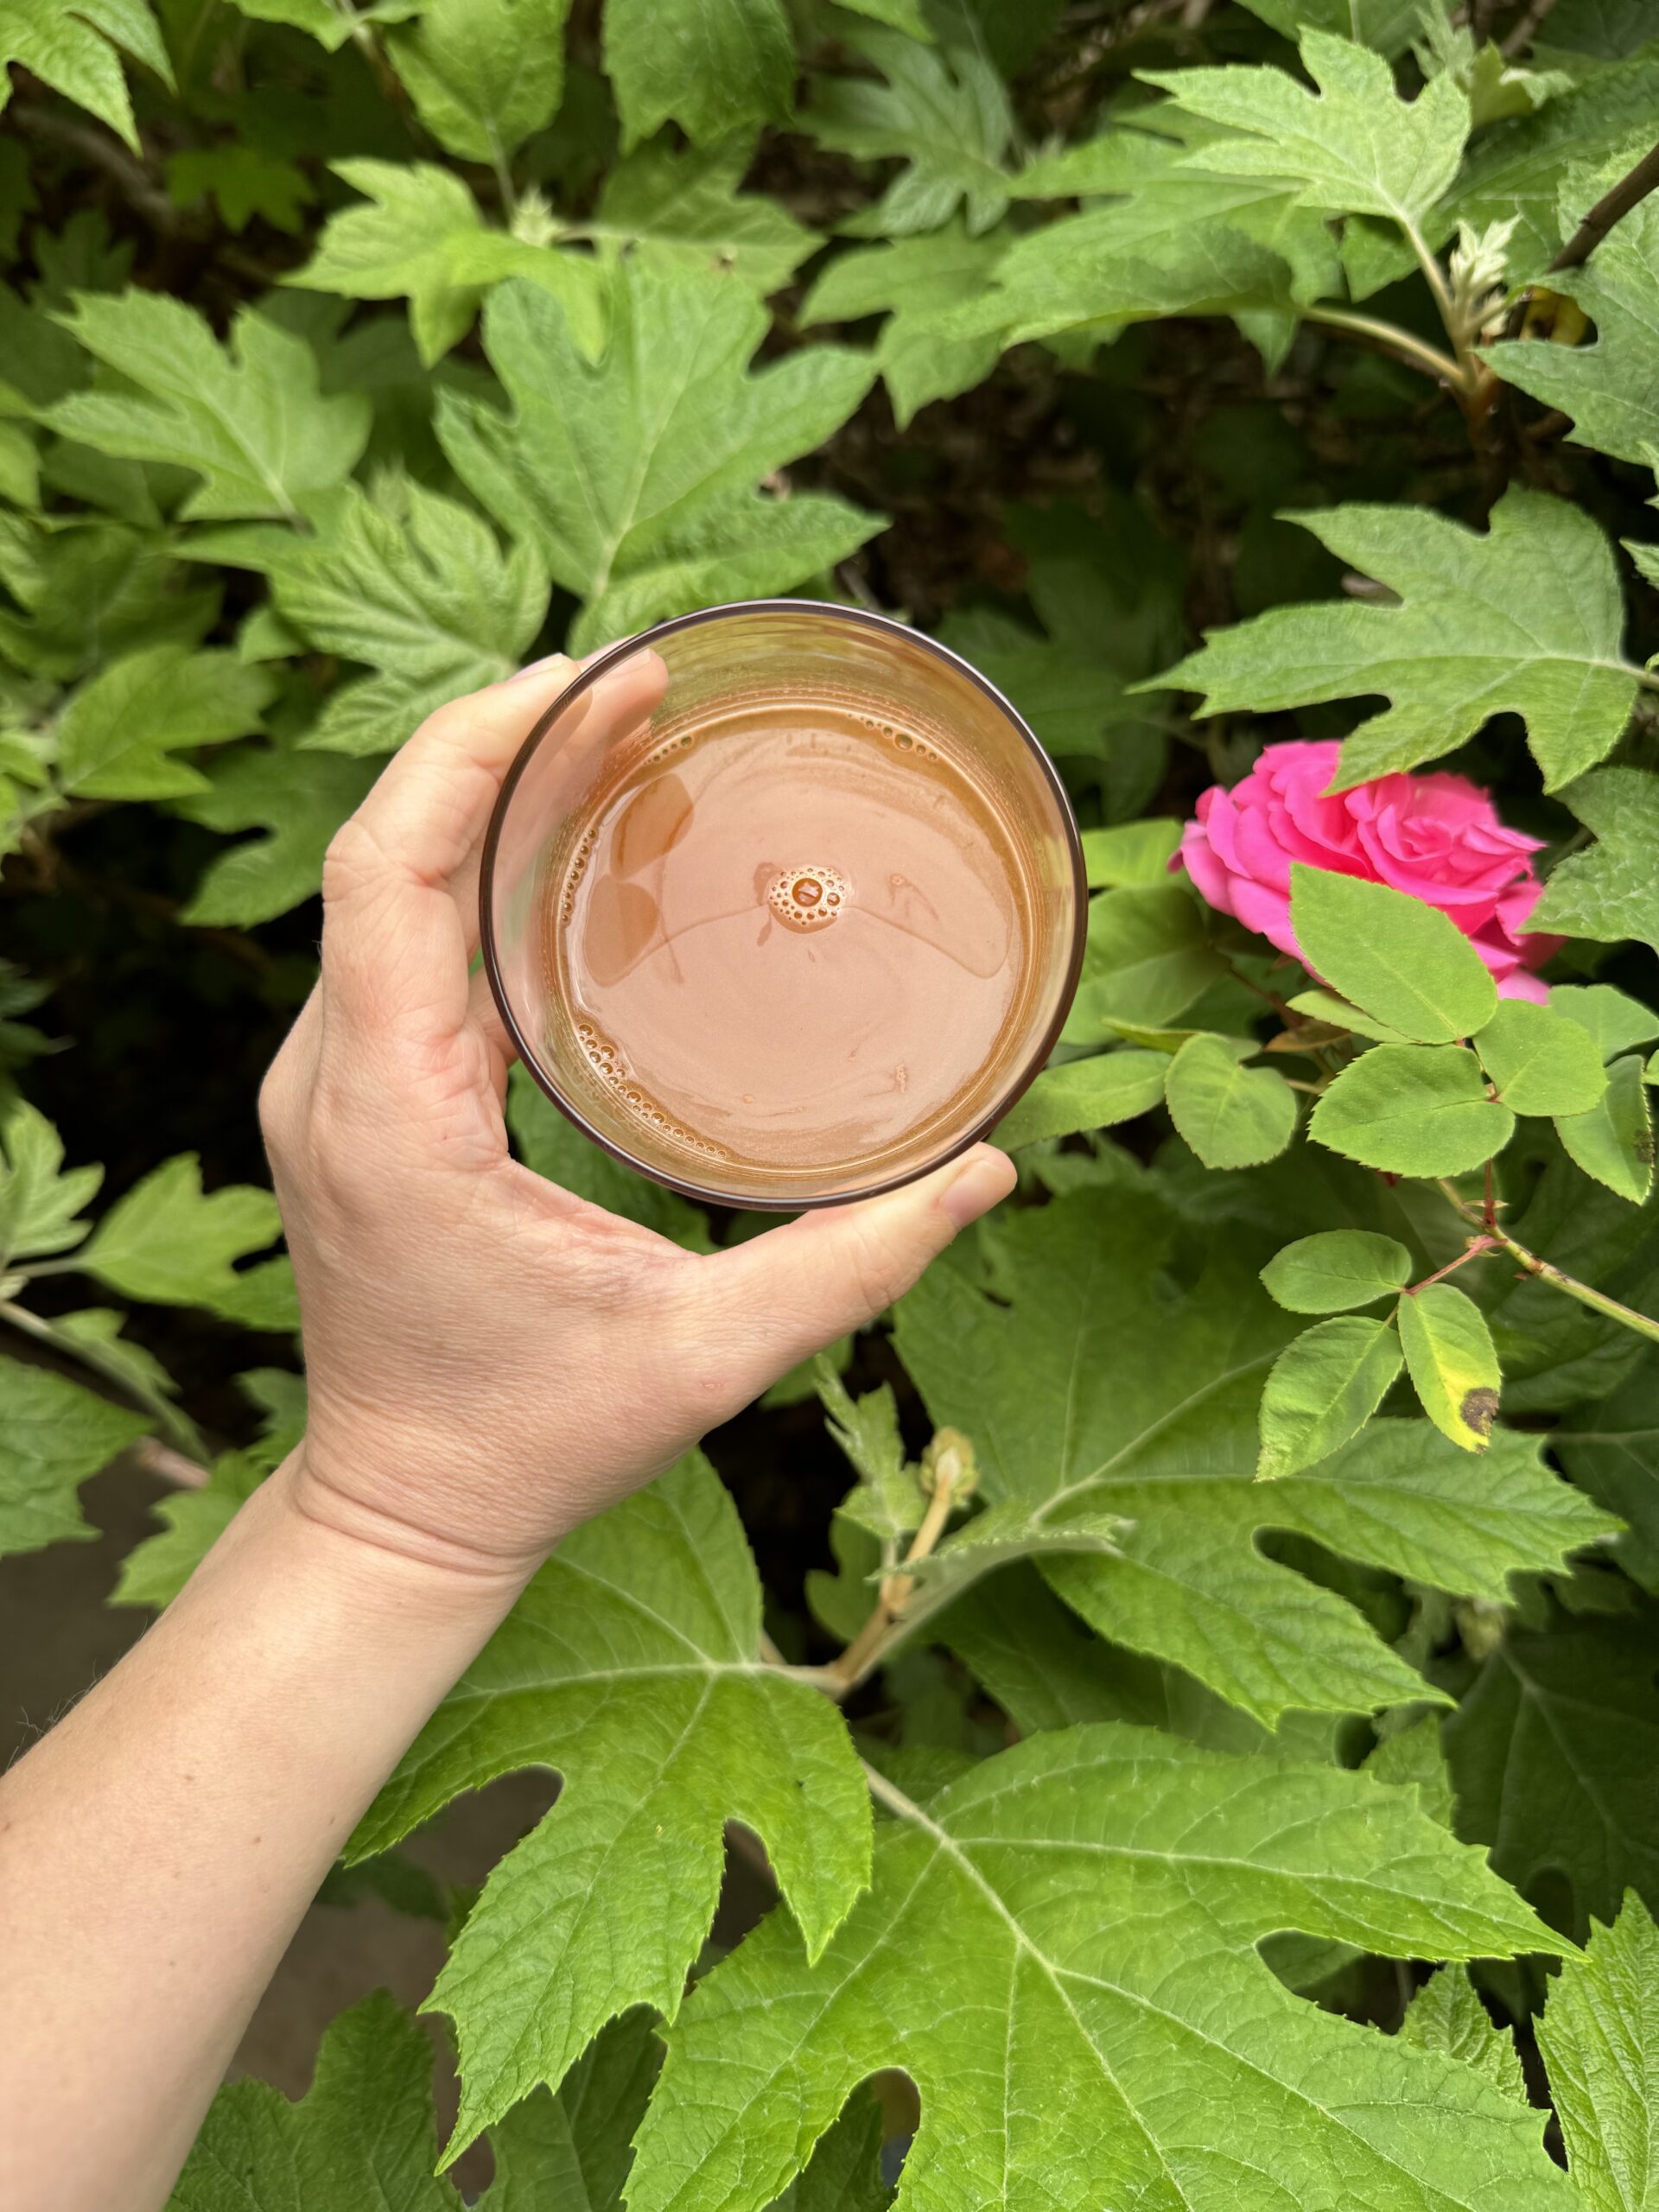 A hand holding a glass of iced coffee, seen from above, surrounded by lush green leaves and a pink rose.